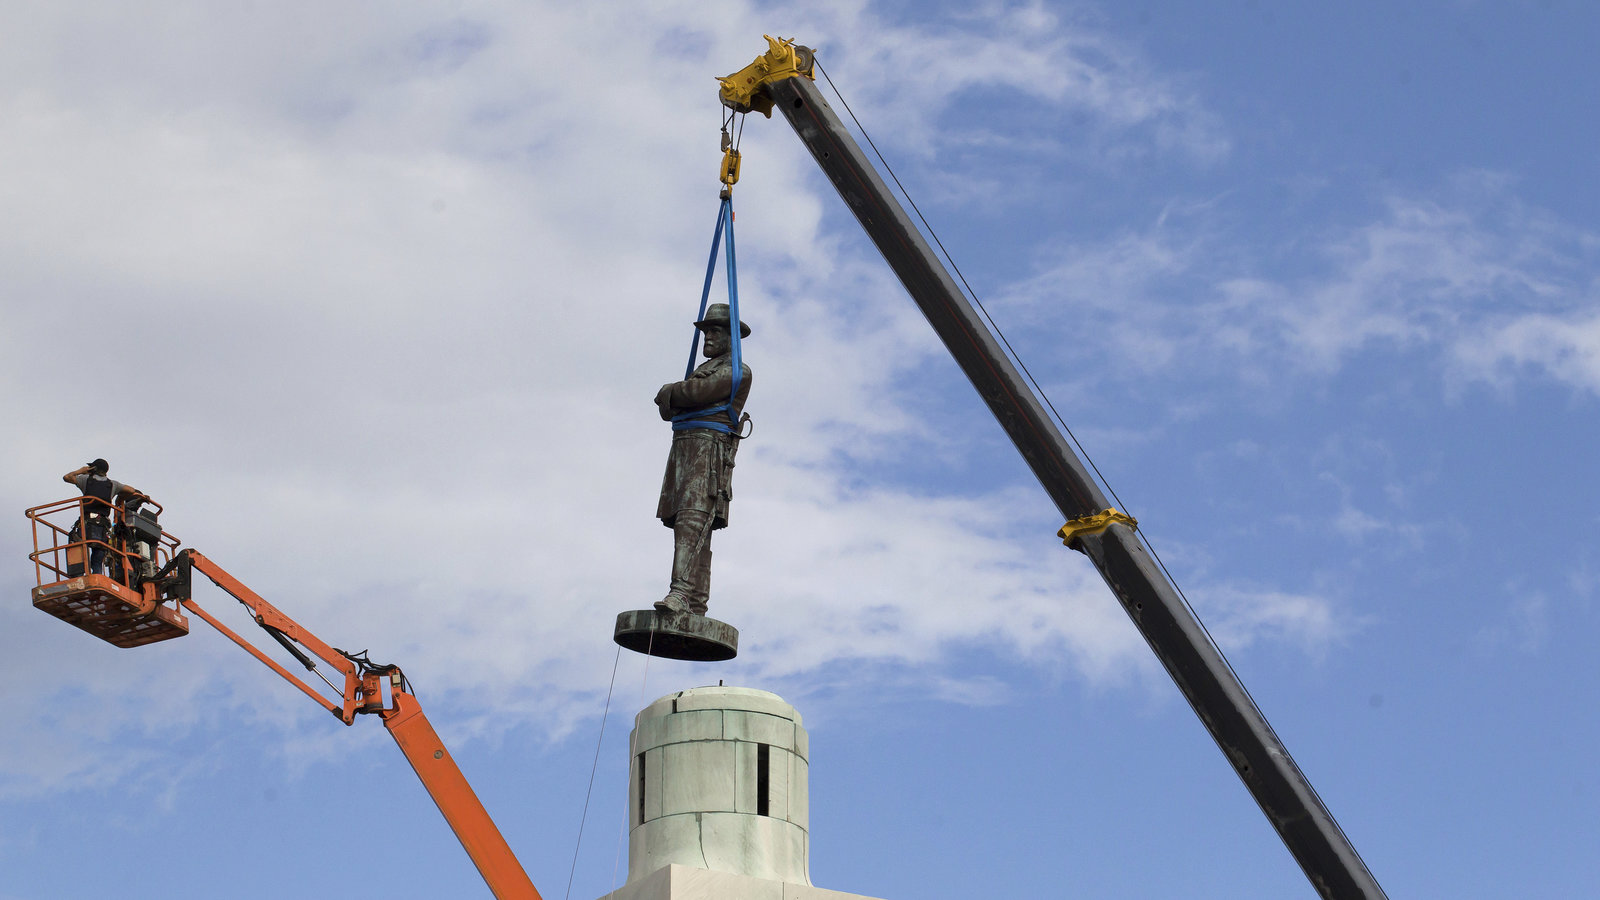 A statue of Confederate Gen. Robert E. Lee being removed from Lee Circle in New Orleans. It was the last of four Confederate statues taken down by a City Council vote that had been proposed by Mayor Mitch Landrieu.